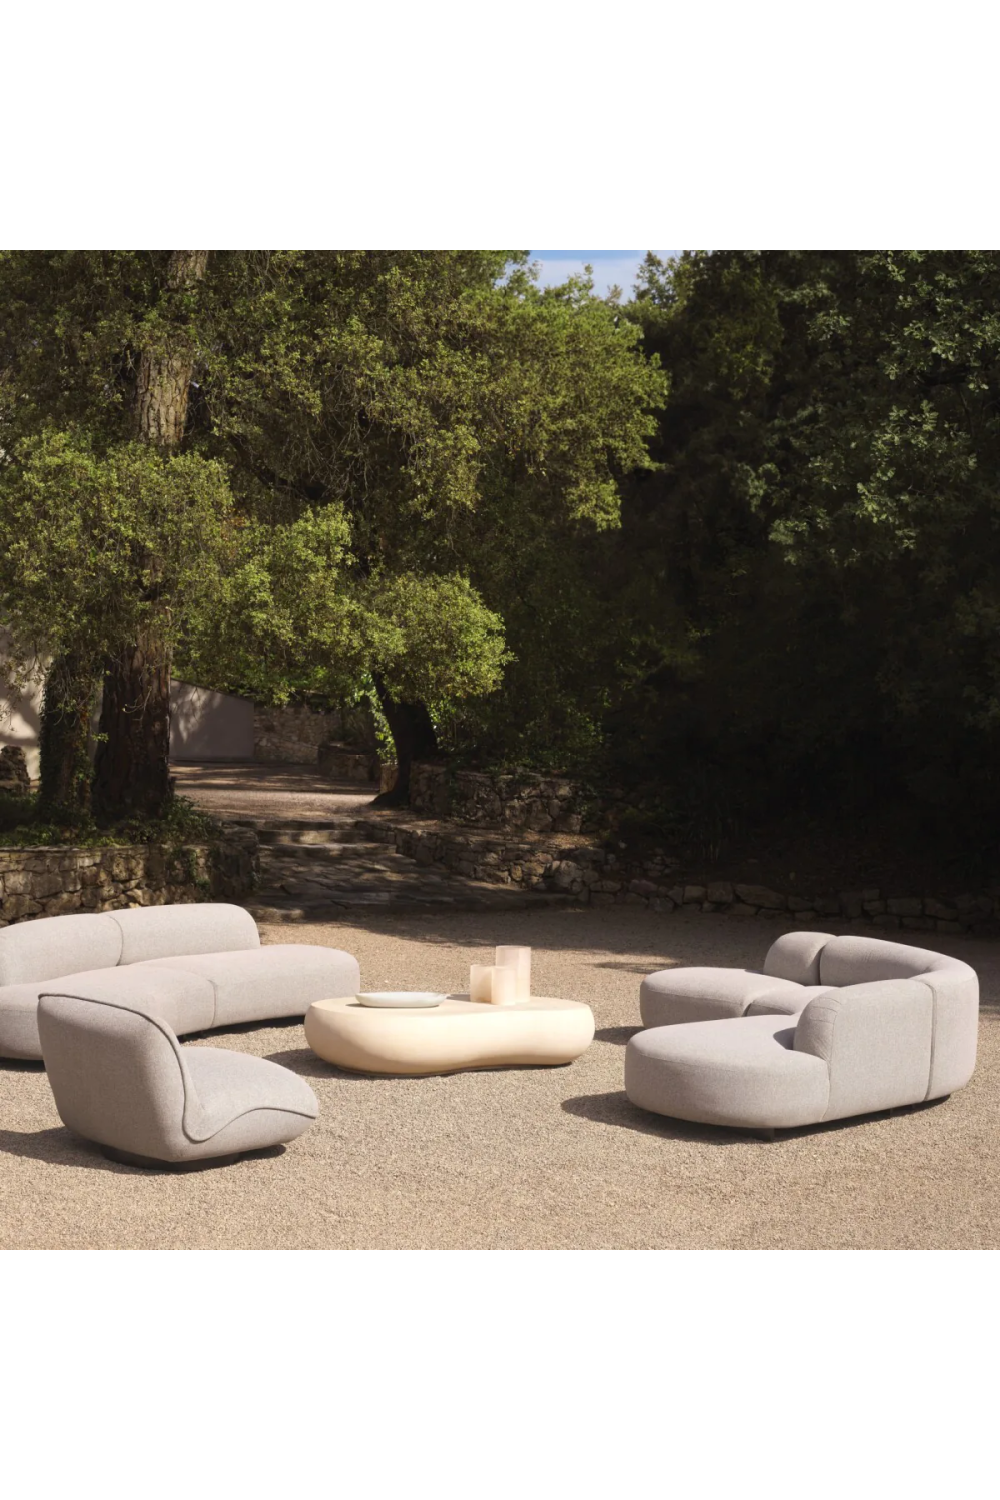 Light Gray Curved Outdoor Sofa